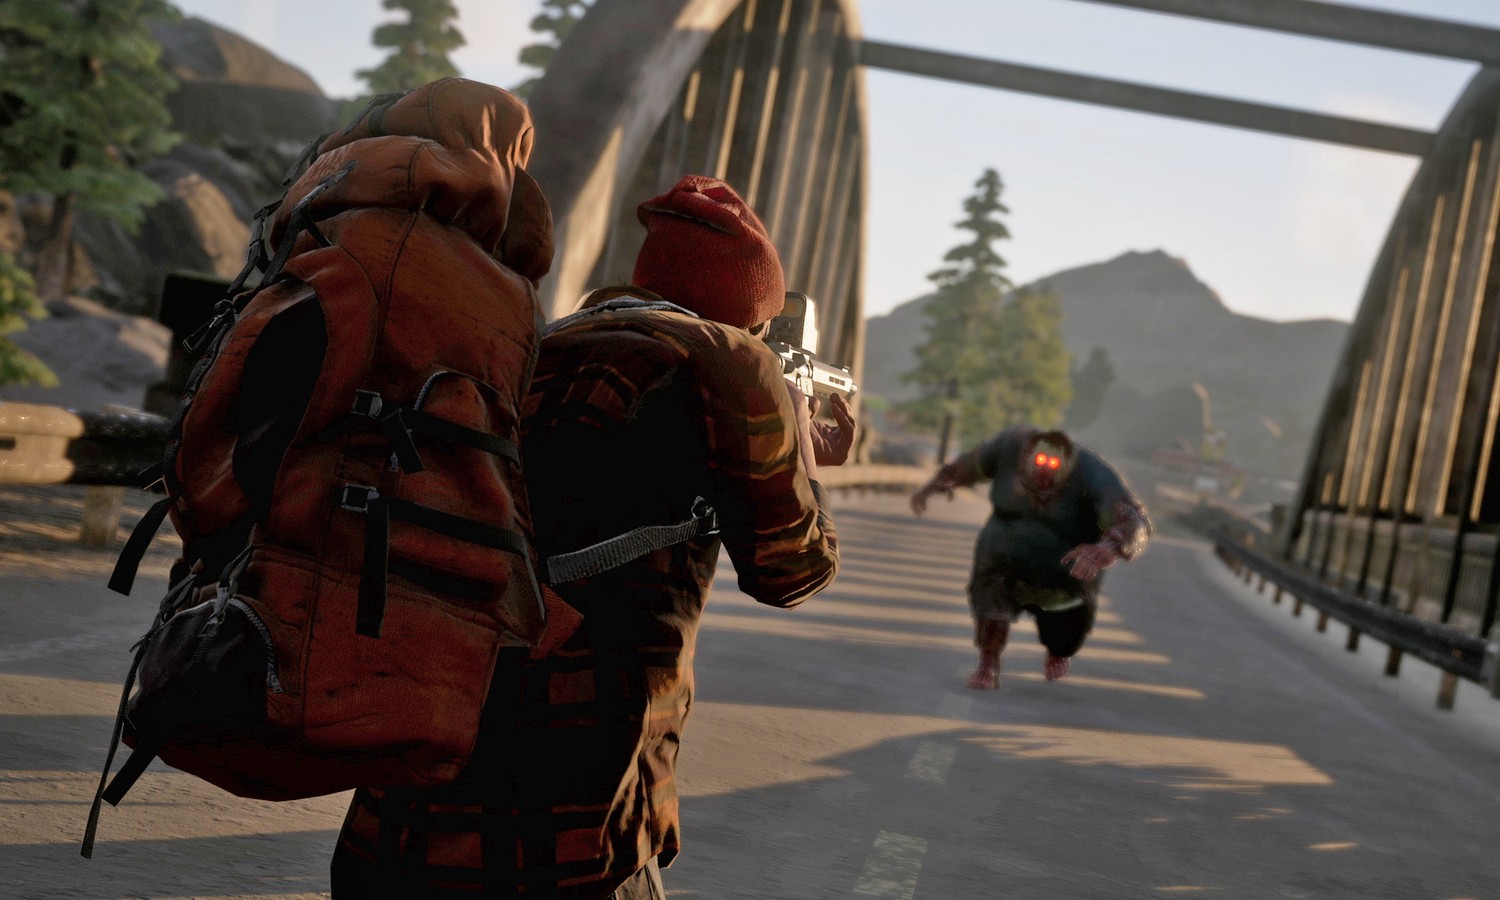 tips on surviving state of decay